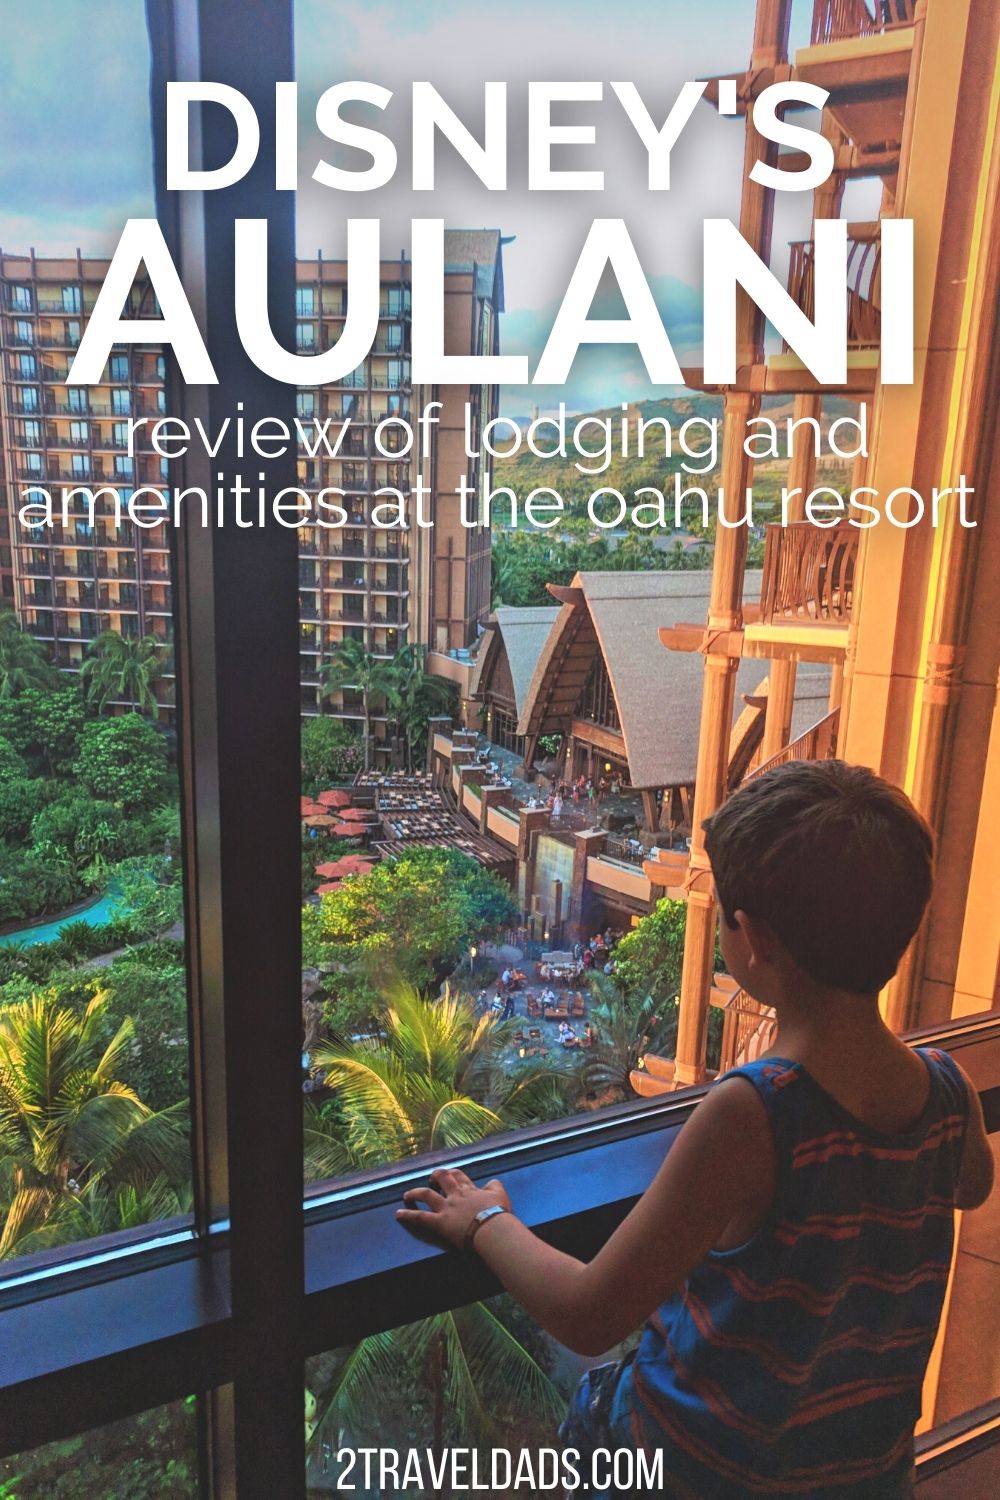 Review of Disney's Aulani Resort on the island of Oahu, Hawaii. From accommodations to resort amenities and things to do near Aualni, this guide is all you need for planning a trip to Disney's Hawaiian resort.